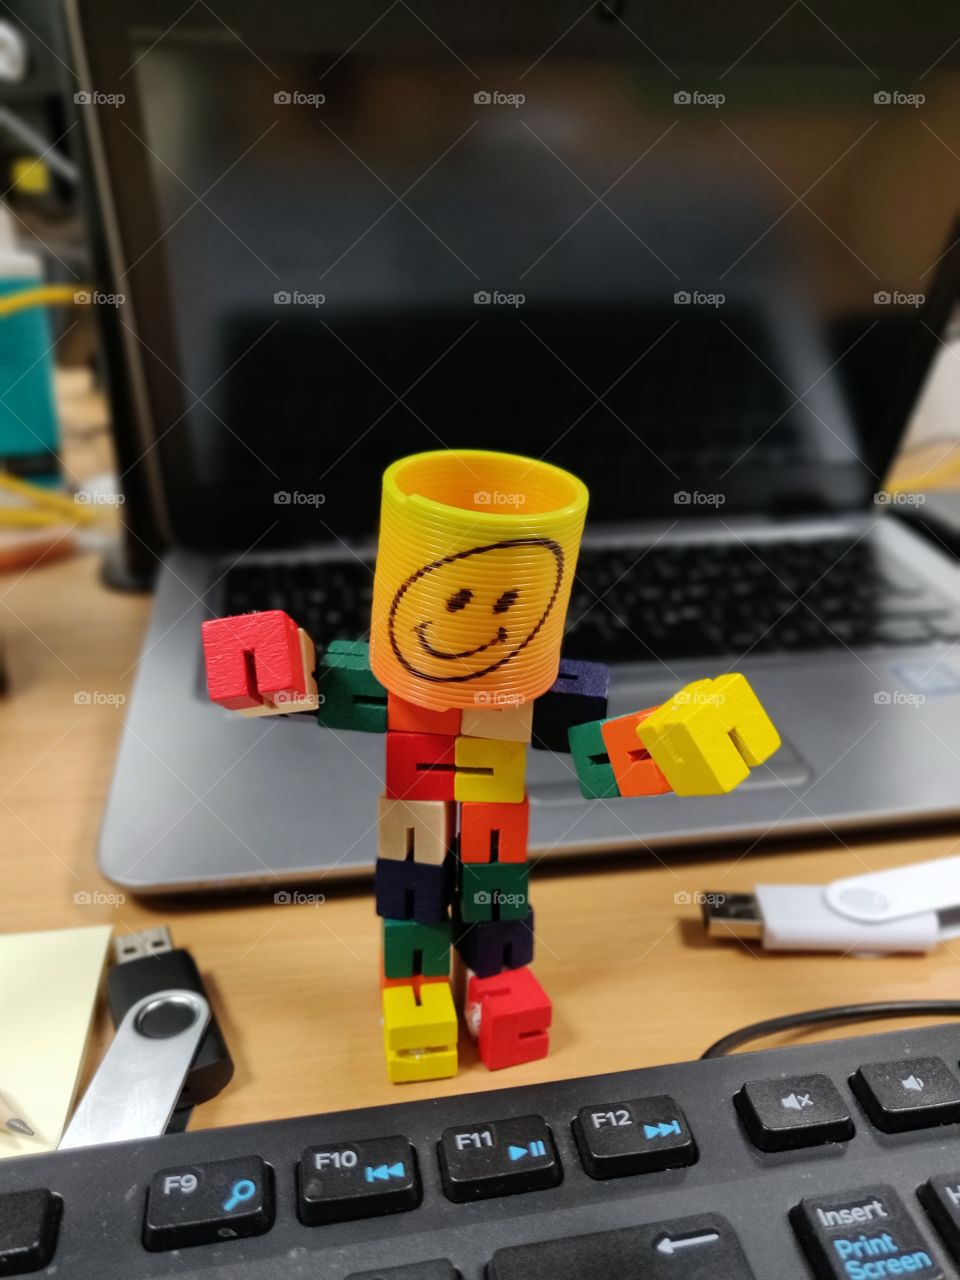 Smiley emoji man on the office desk by the laptop and keyboard